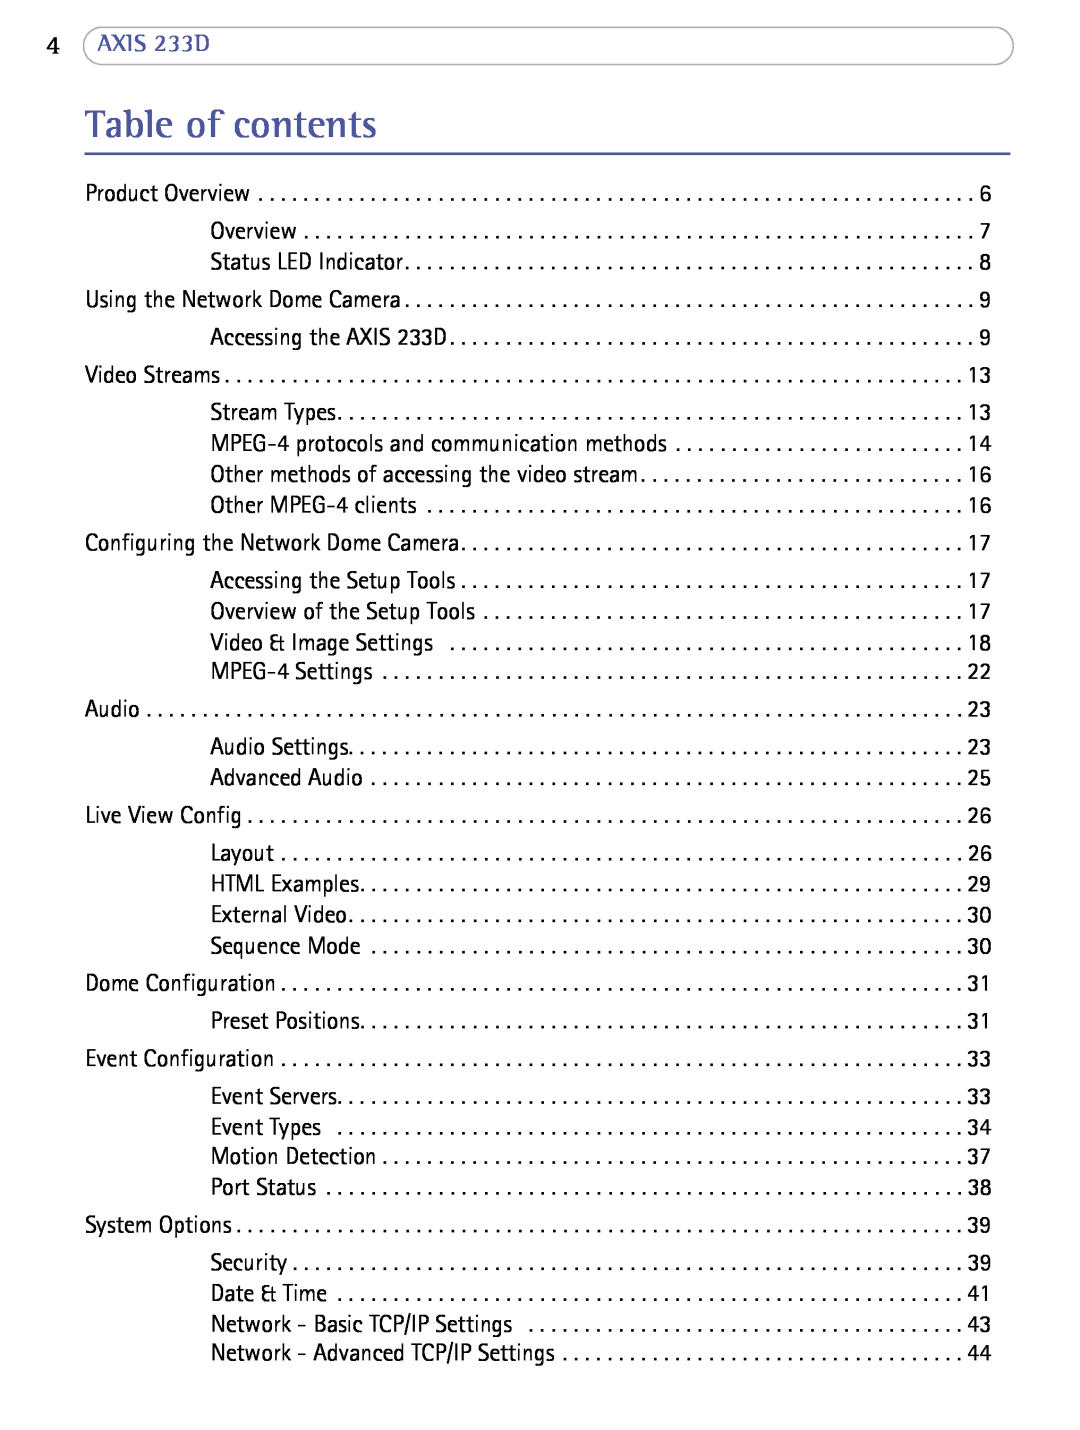 Axis Communications user manual Table of contents, AXIS 233D, Configuring the Network Dome Camera 